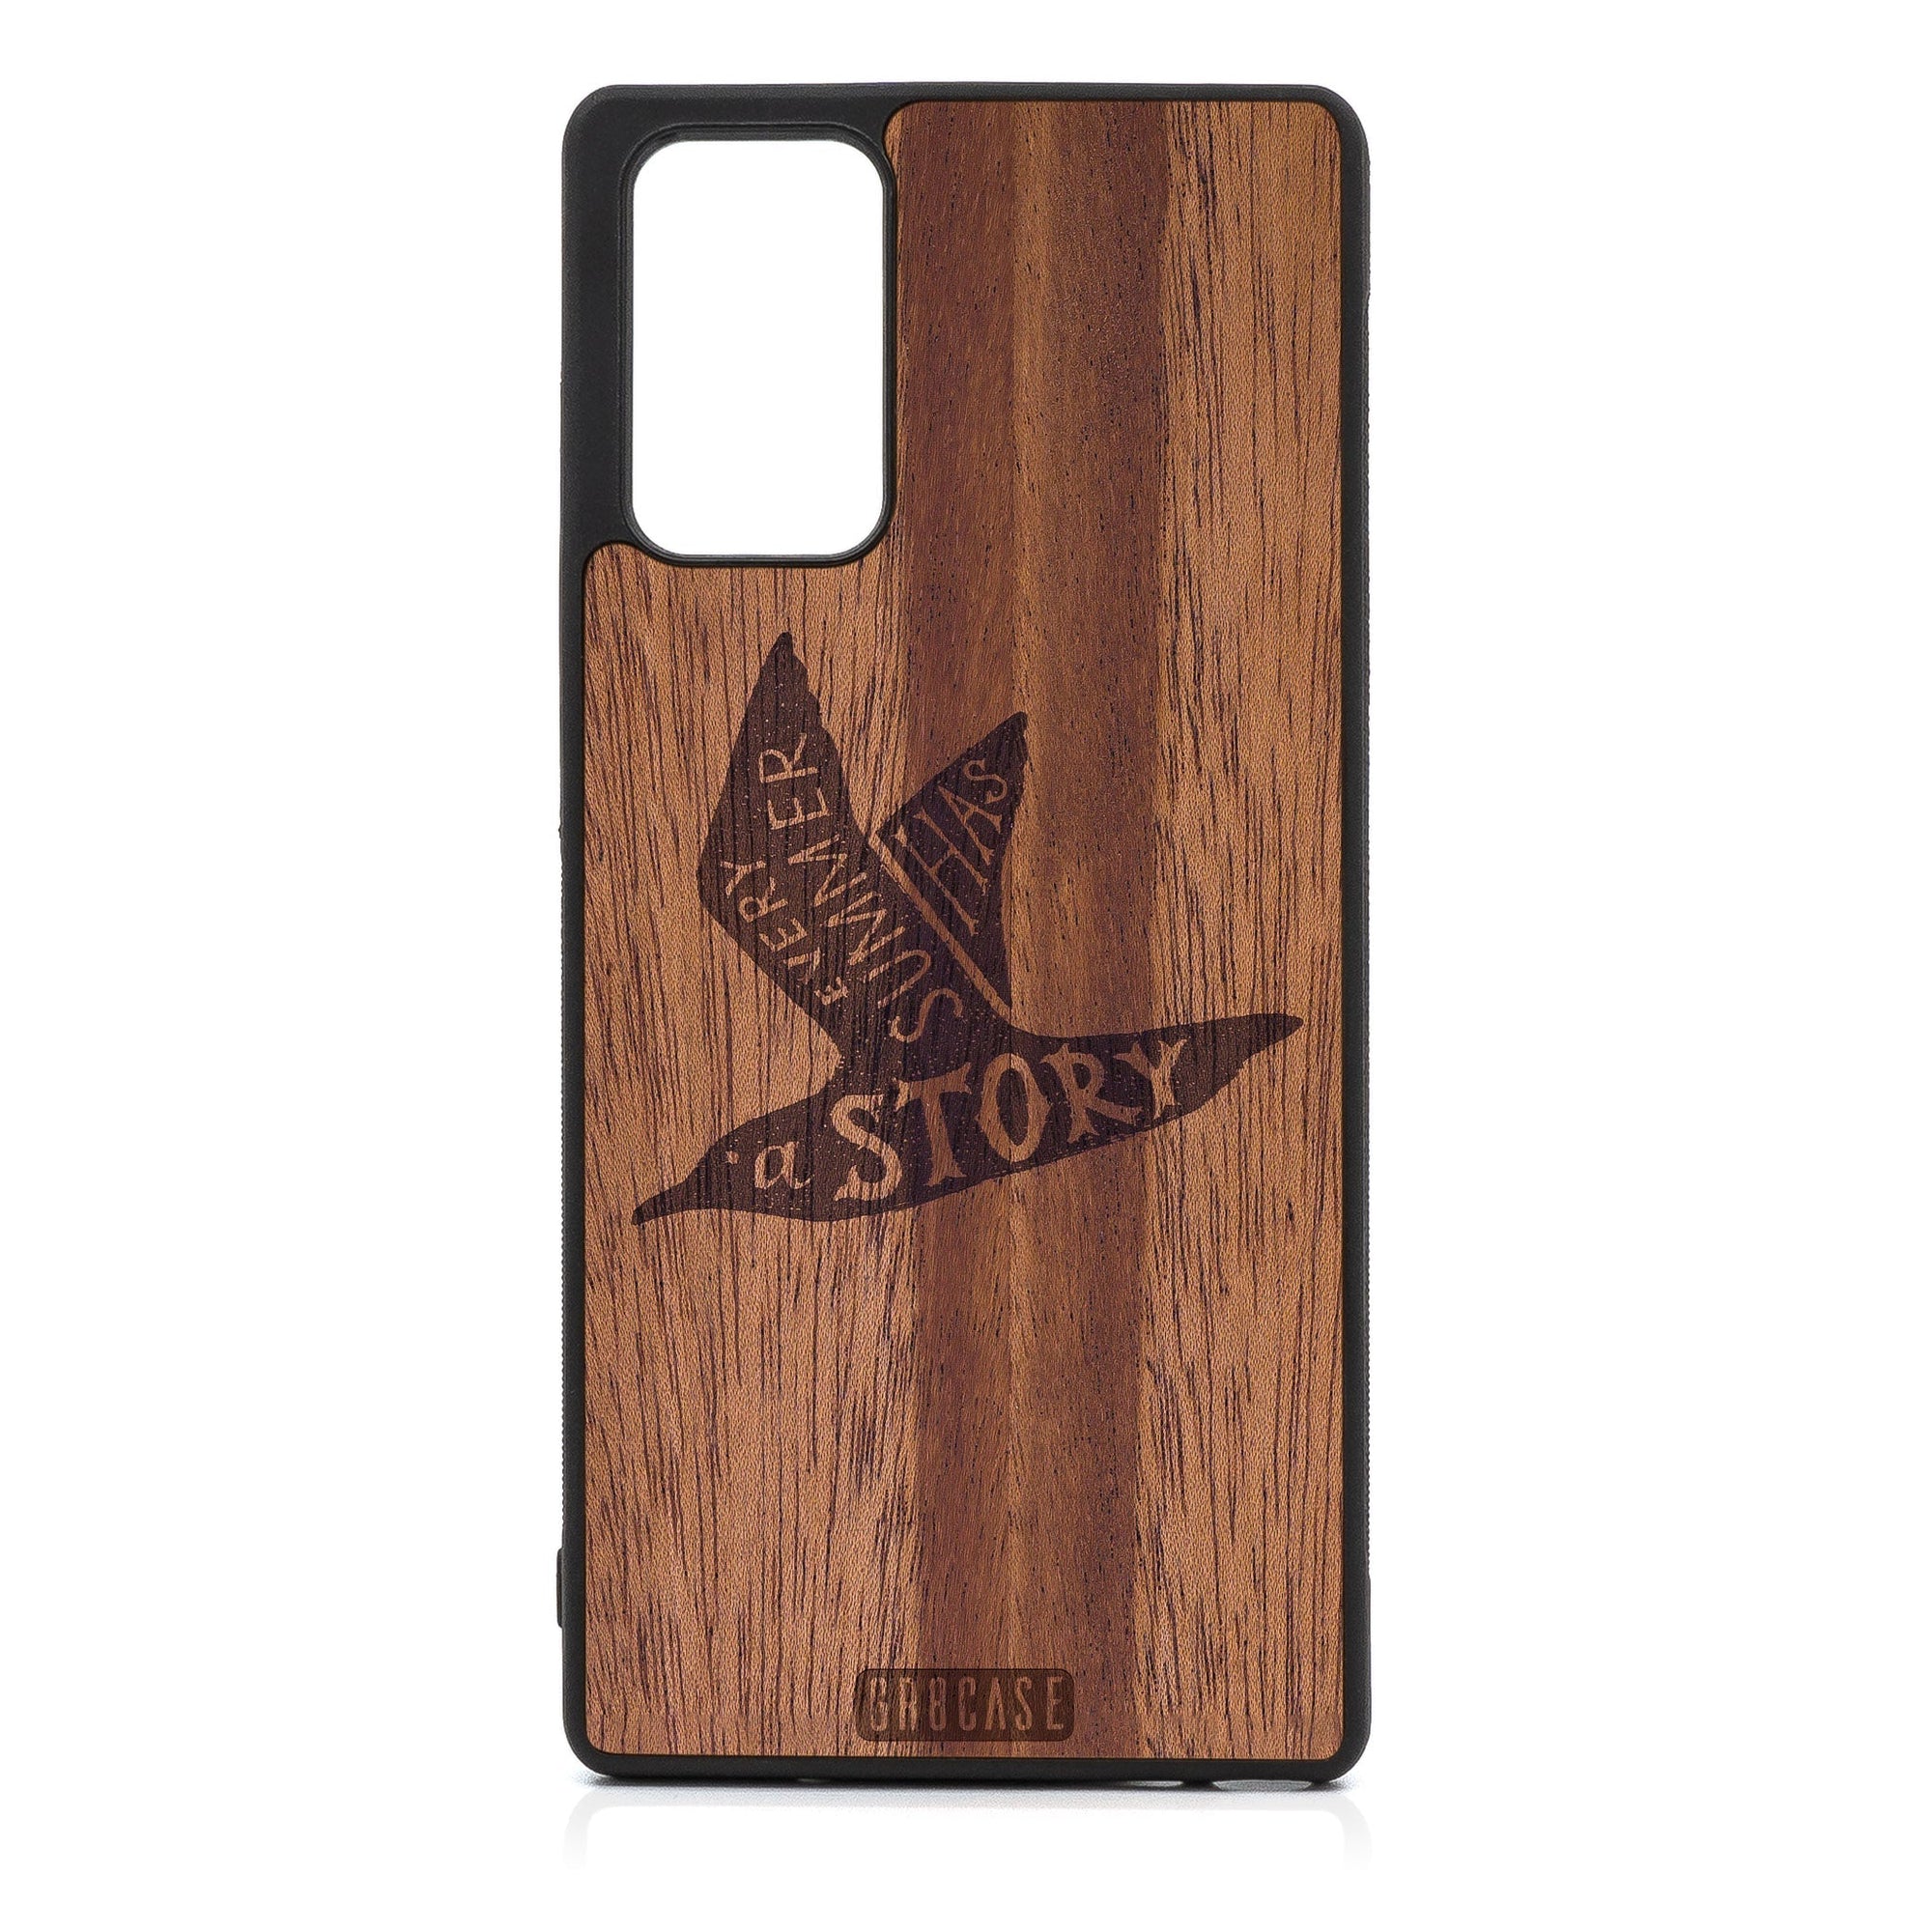 Every Summer Has A Story (Seagull) Design Wood Case For Samsung Galaxy A33 5G